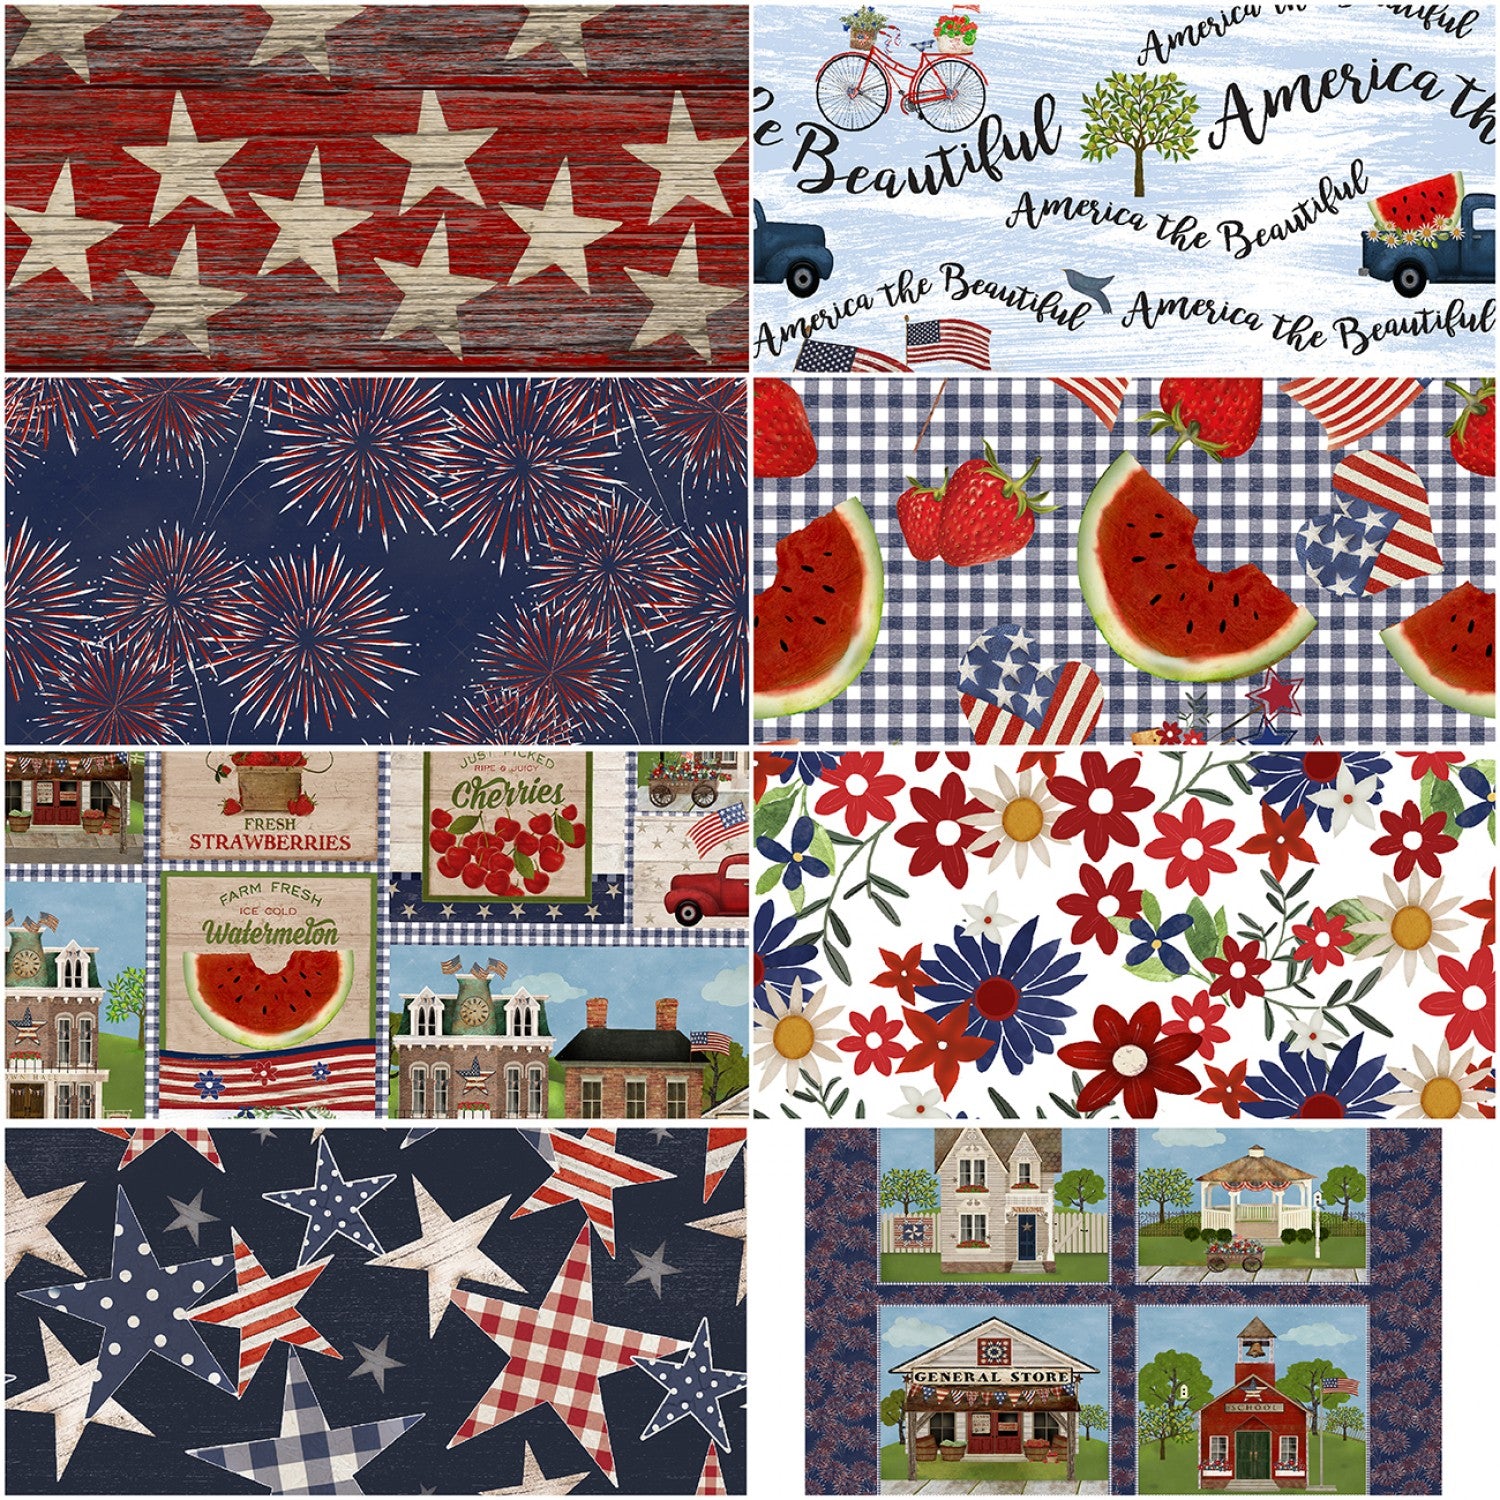 Sweet Land of Liberty - Sparkling Sky Navy by Beth Albert